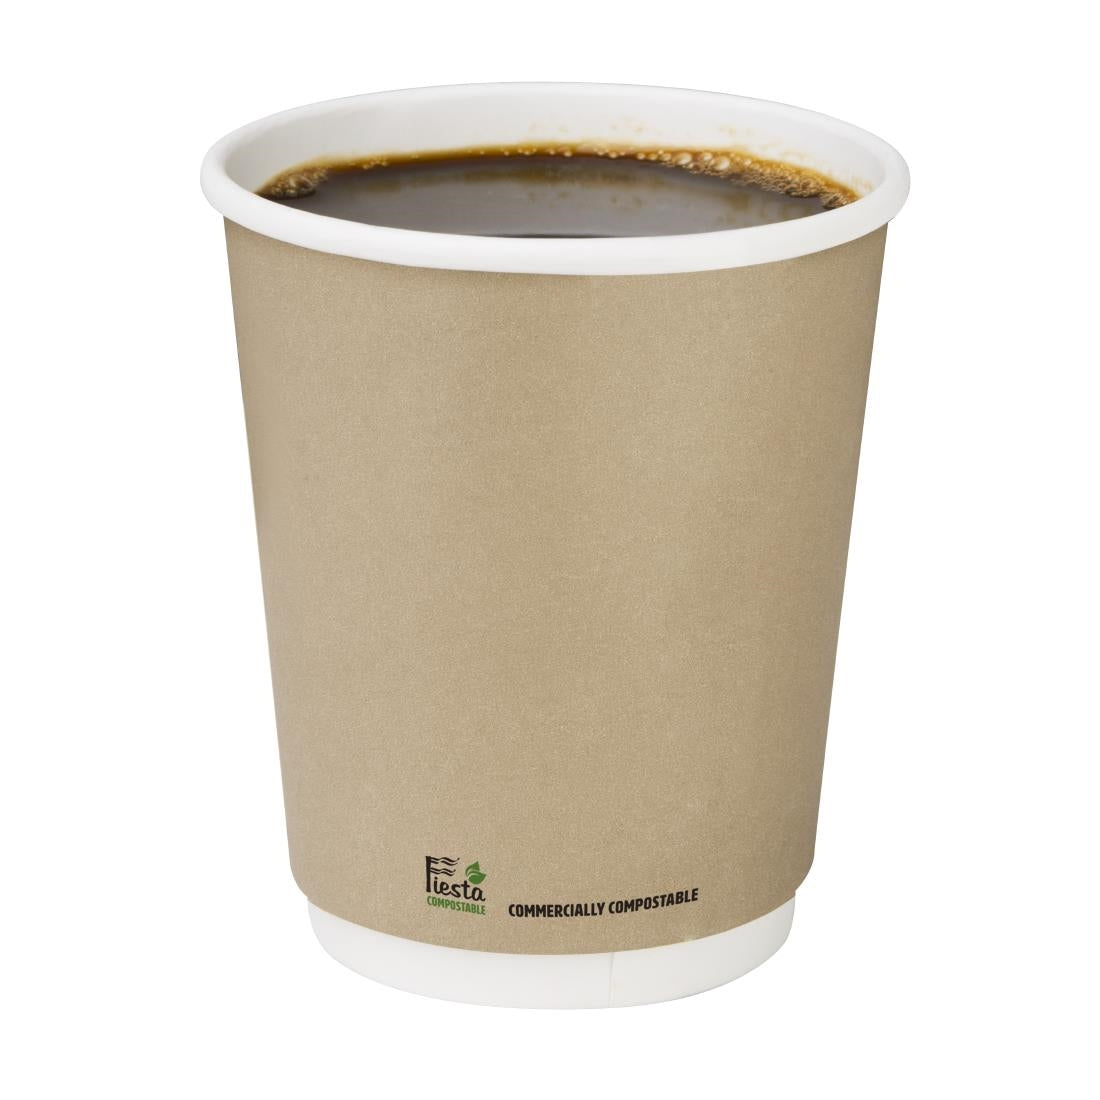 CU985 Fiesta Compostable Coffee Cups Double Wall 227ml / 8oz (Pack of 25)